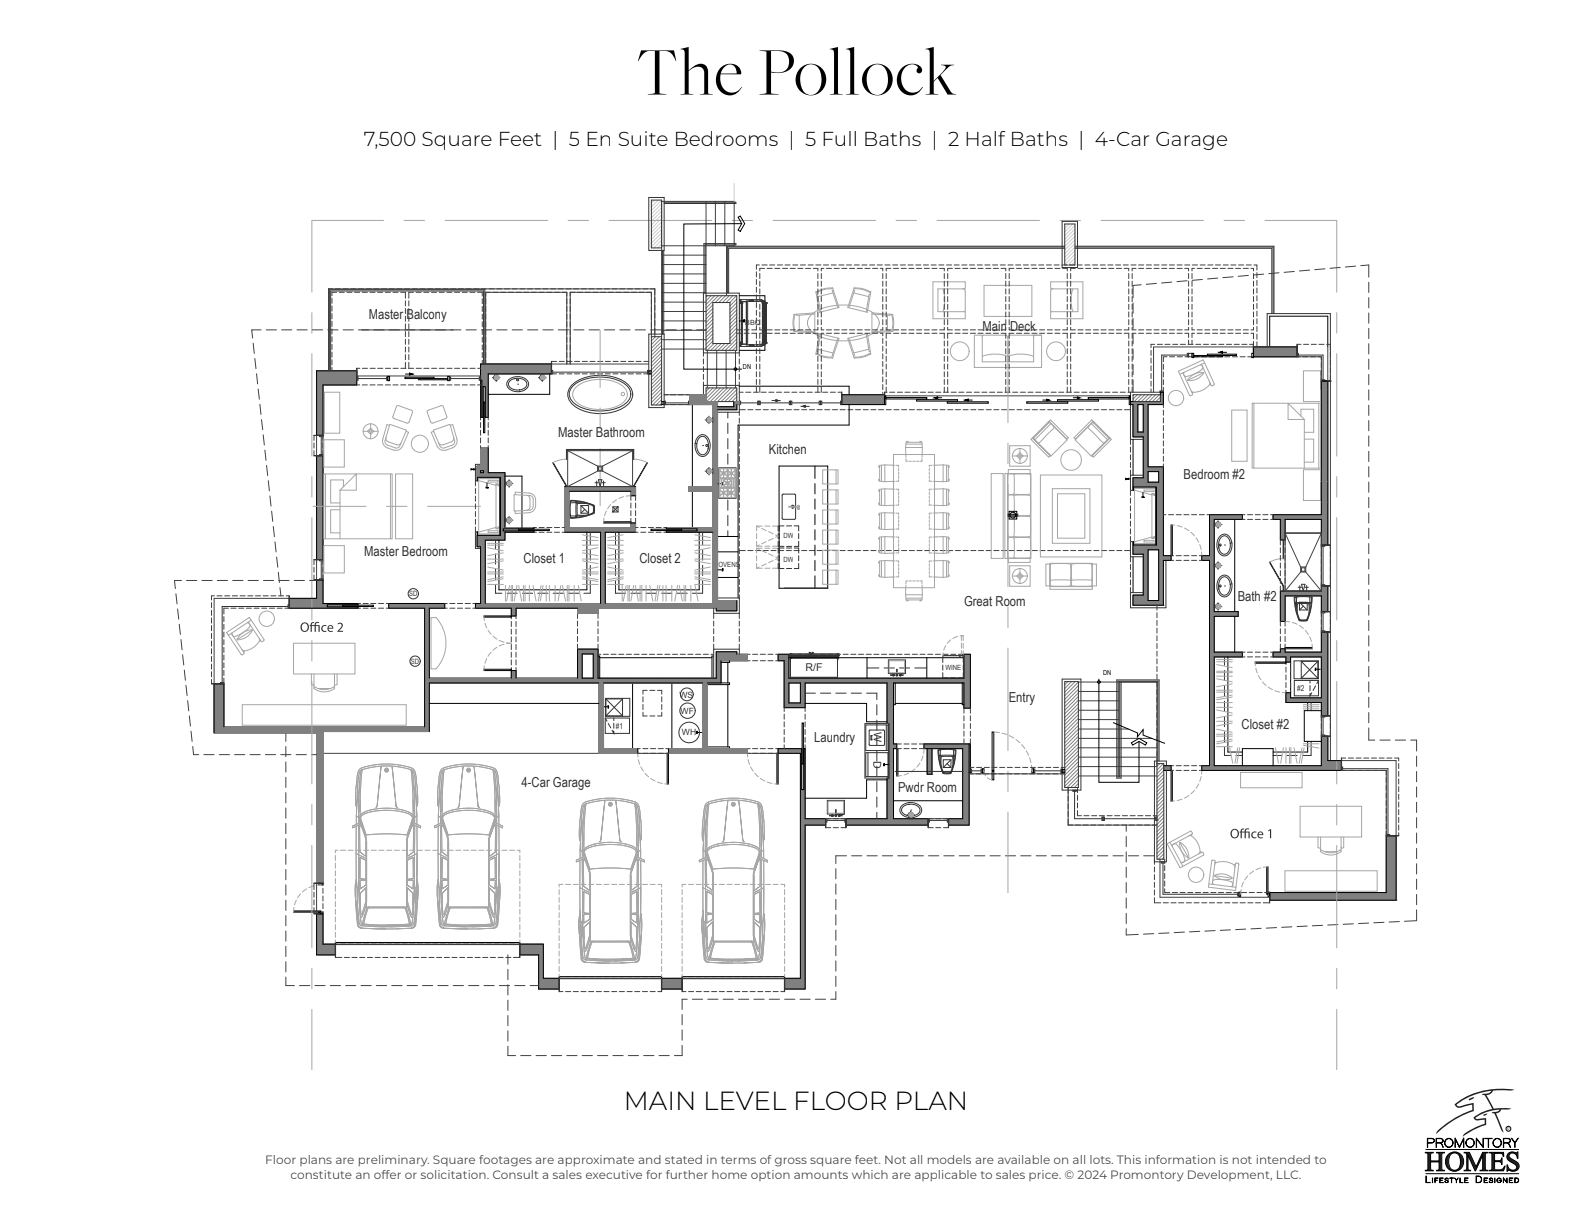 Promontory homes - The Pollock